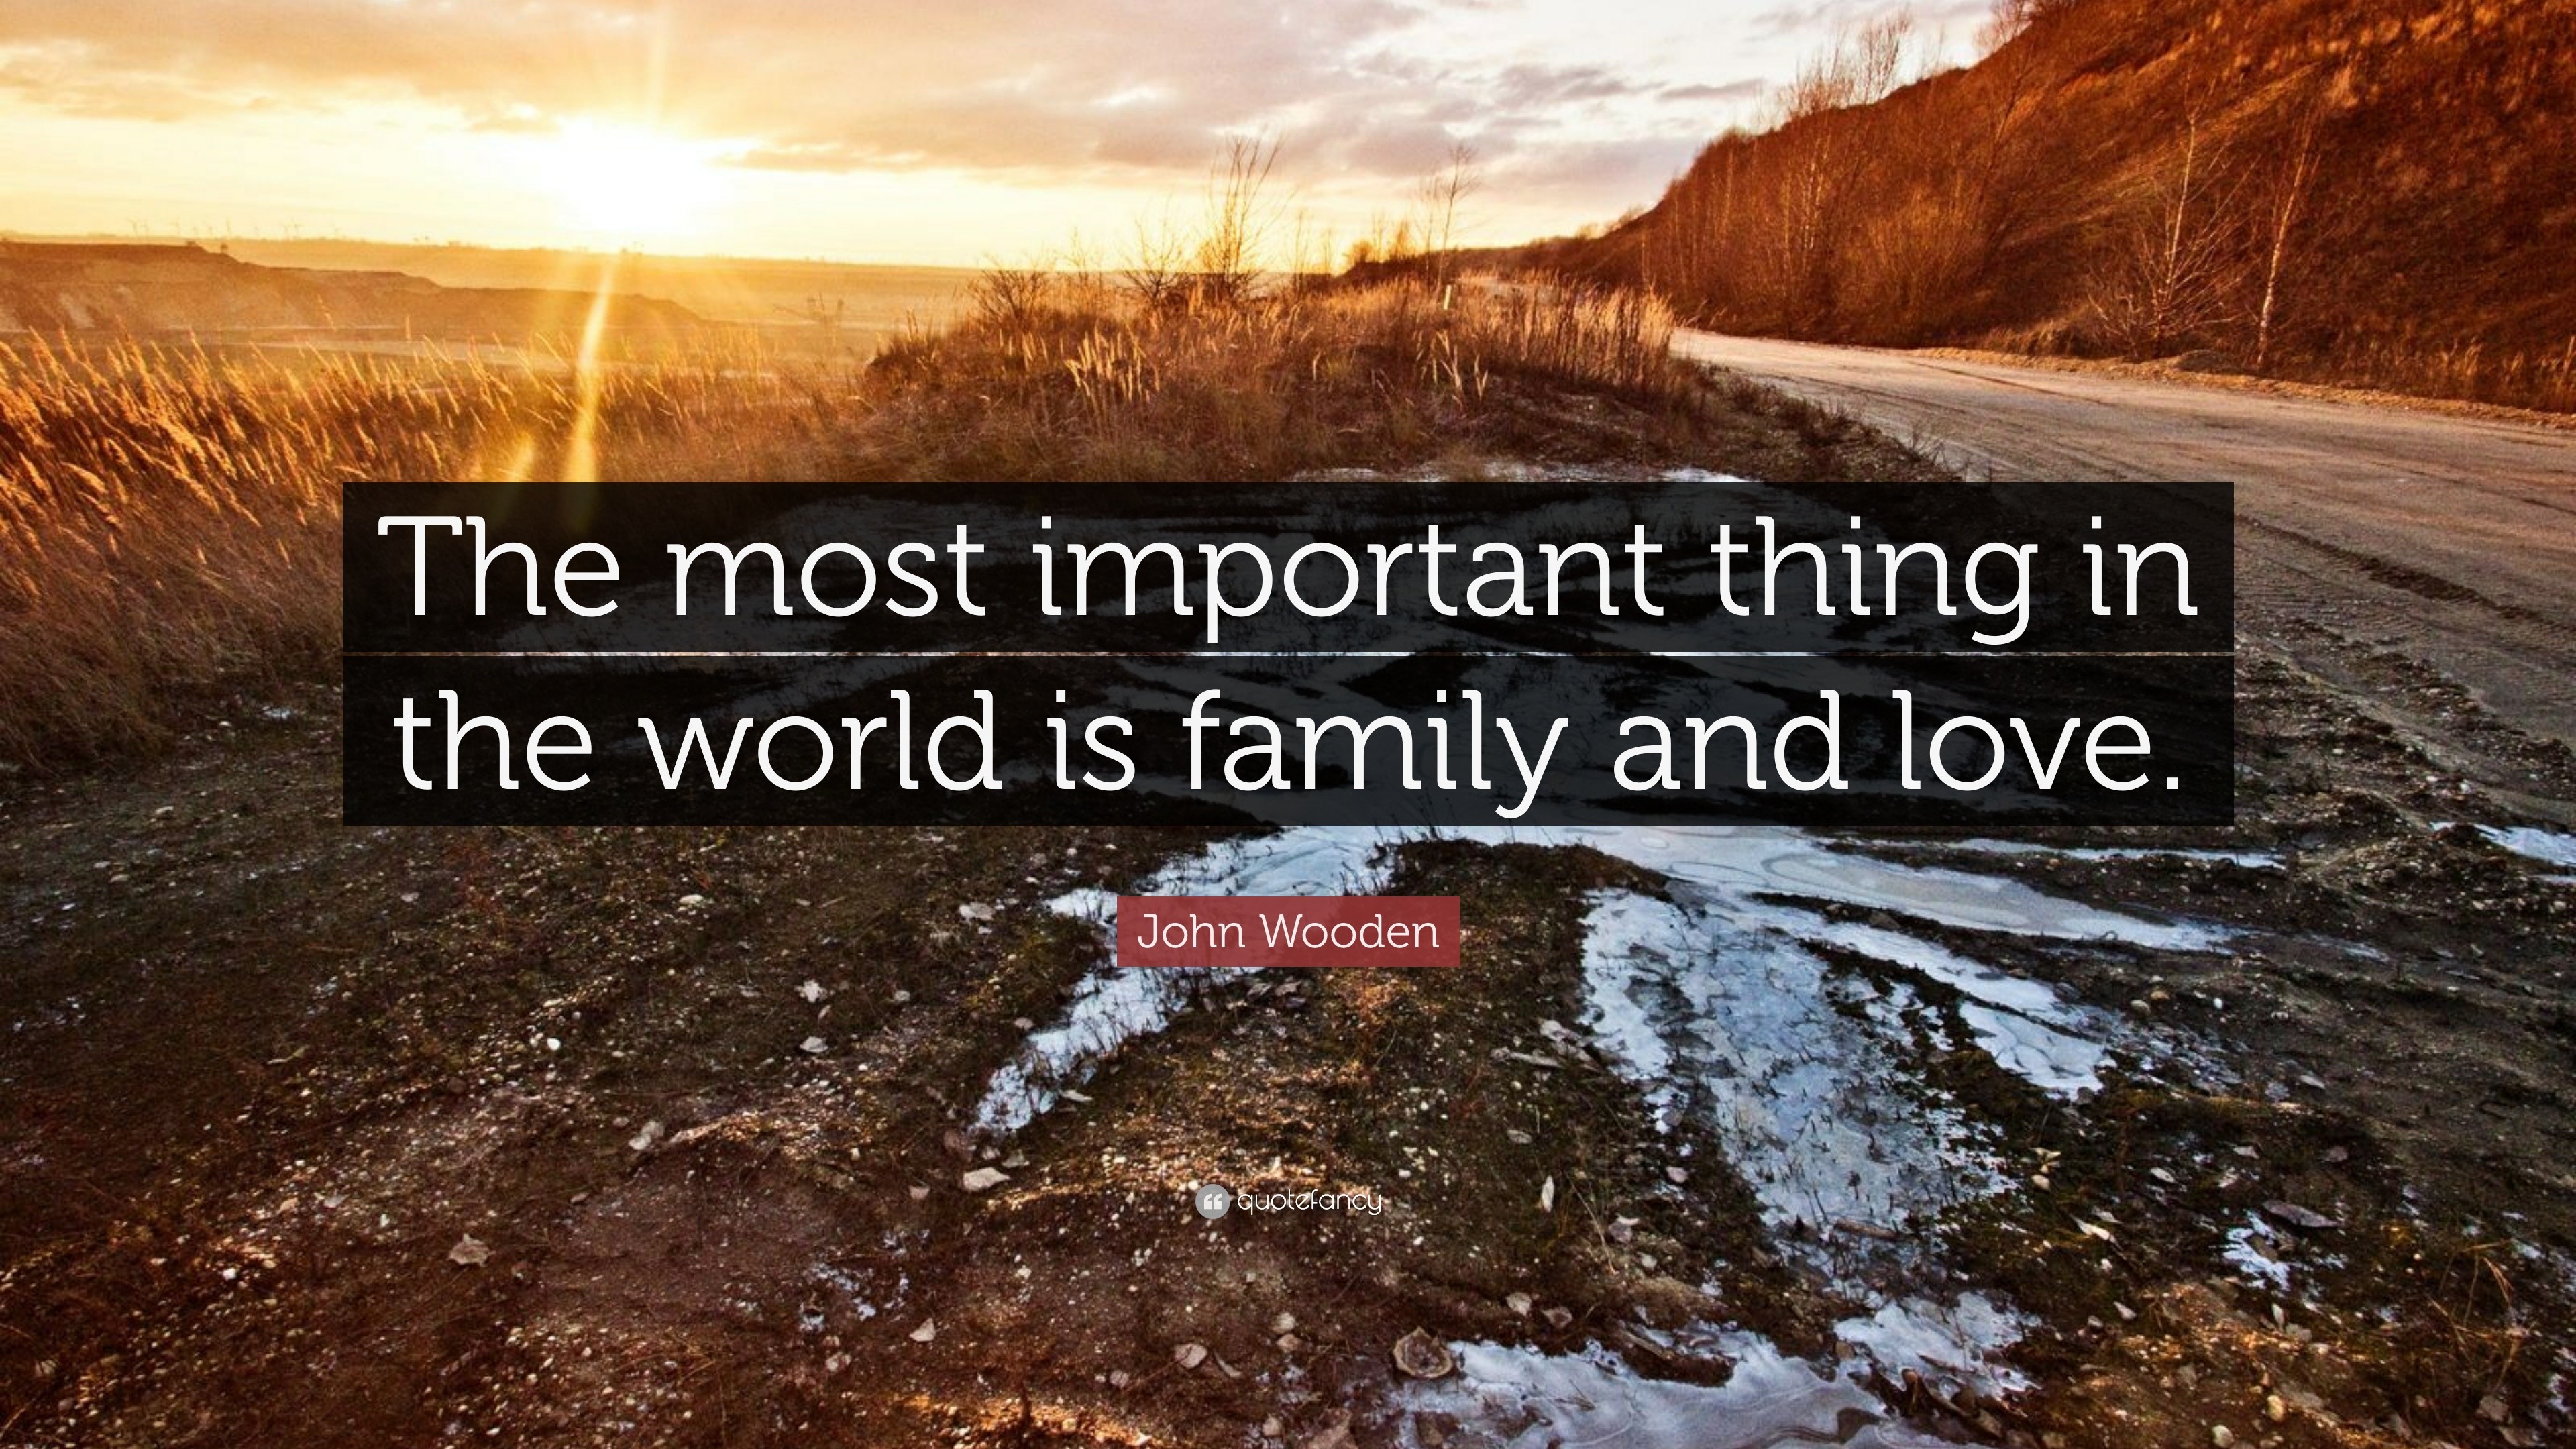 John Wooden Quote: “The most important thing in the world is family and ...